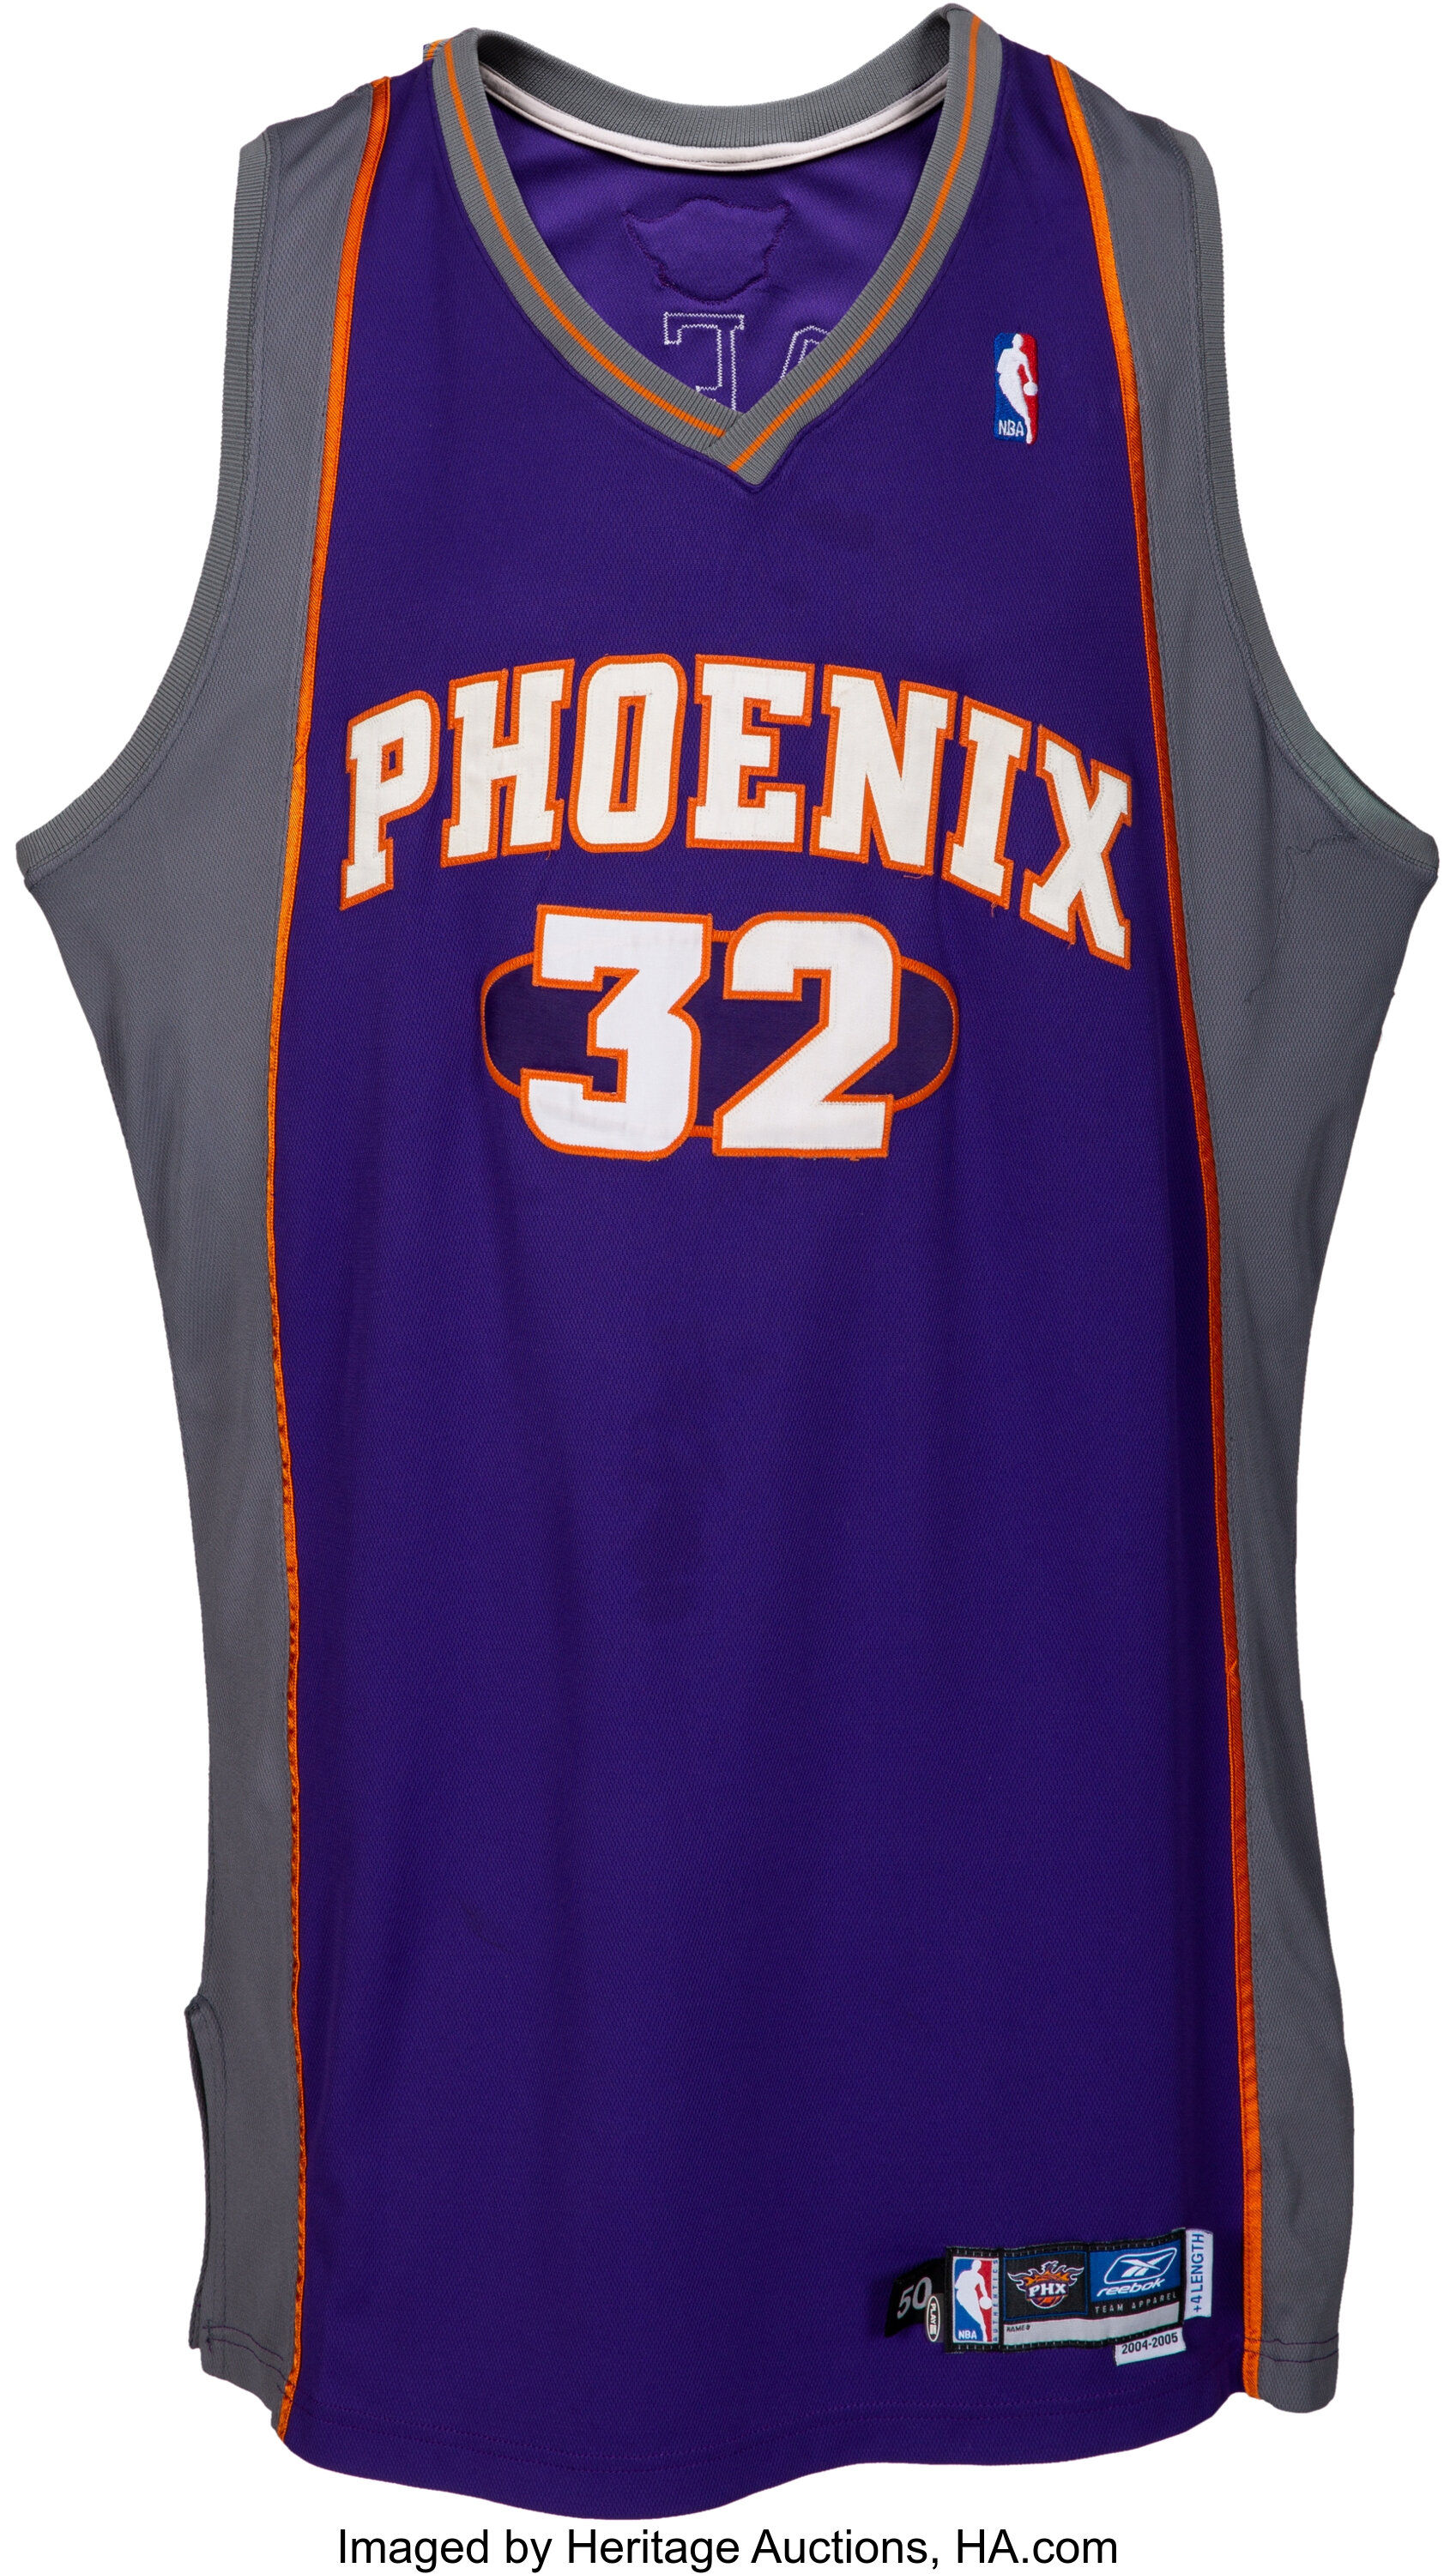 Suns retiring jerseys of Stoudemire, Marion